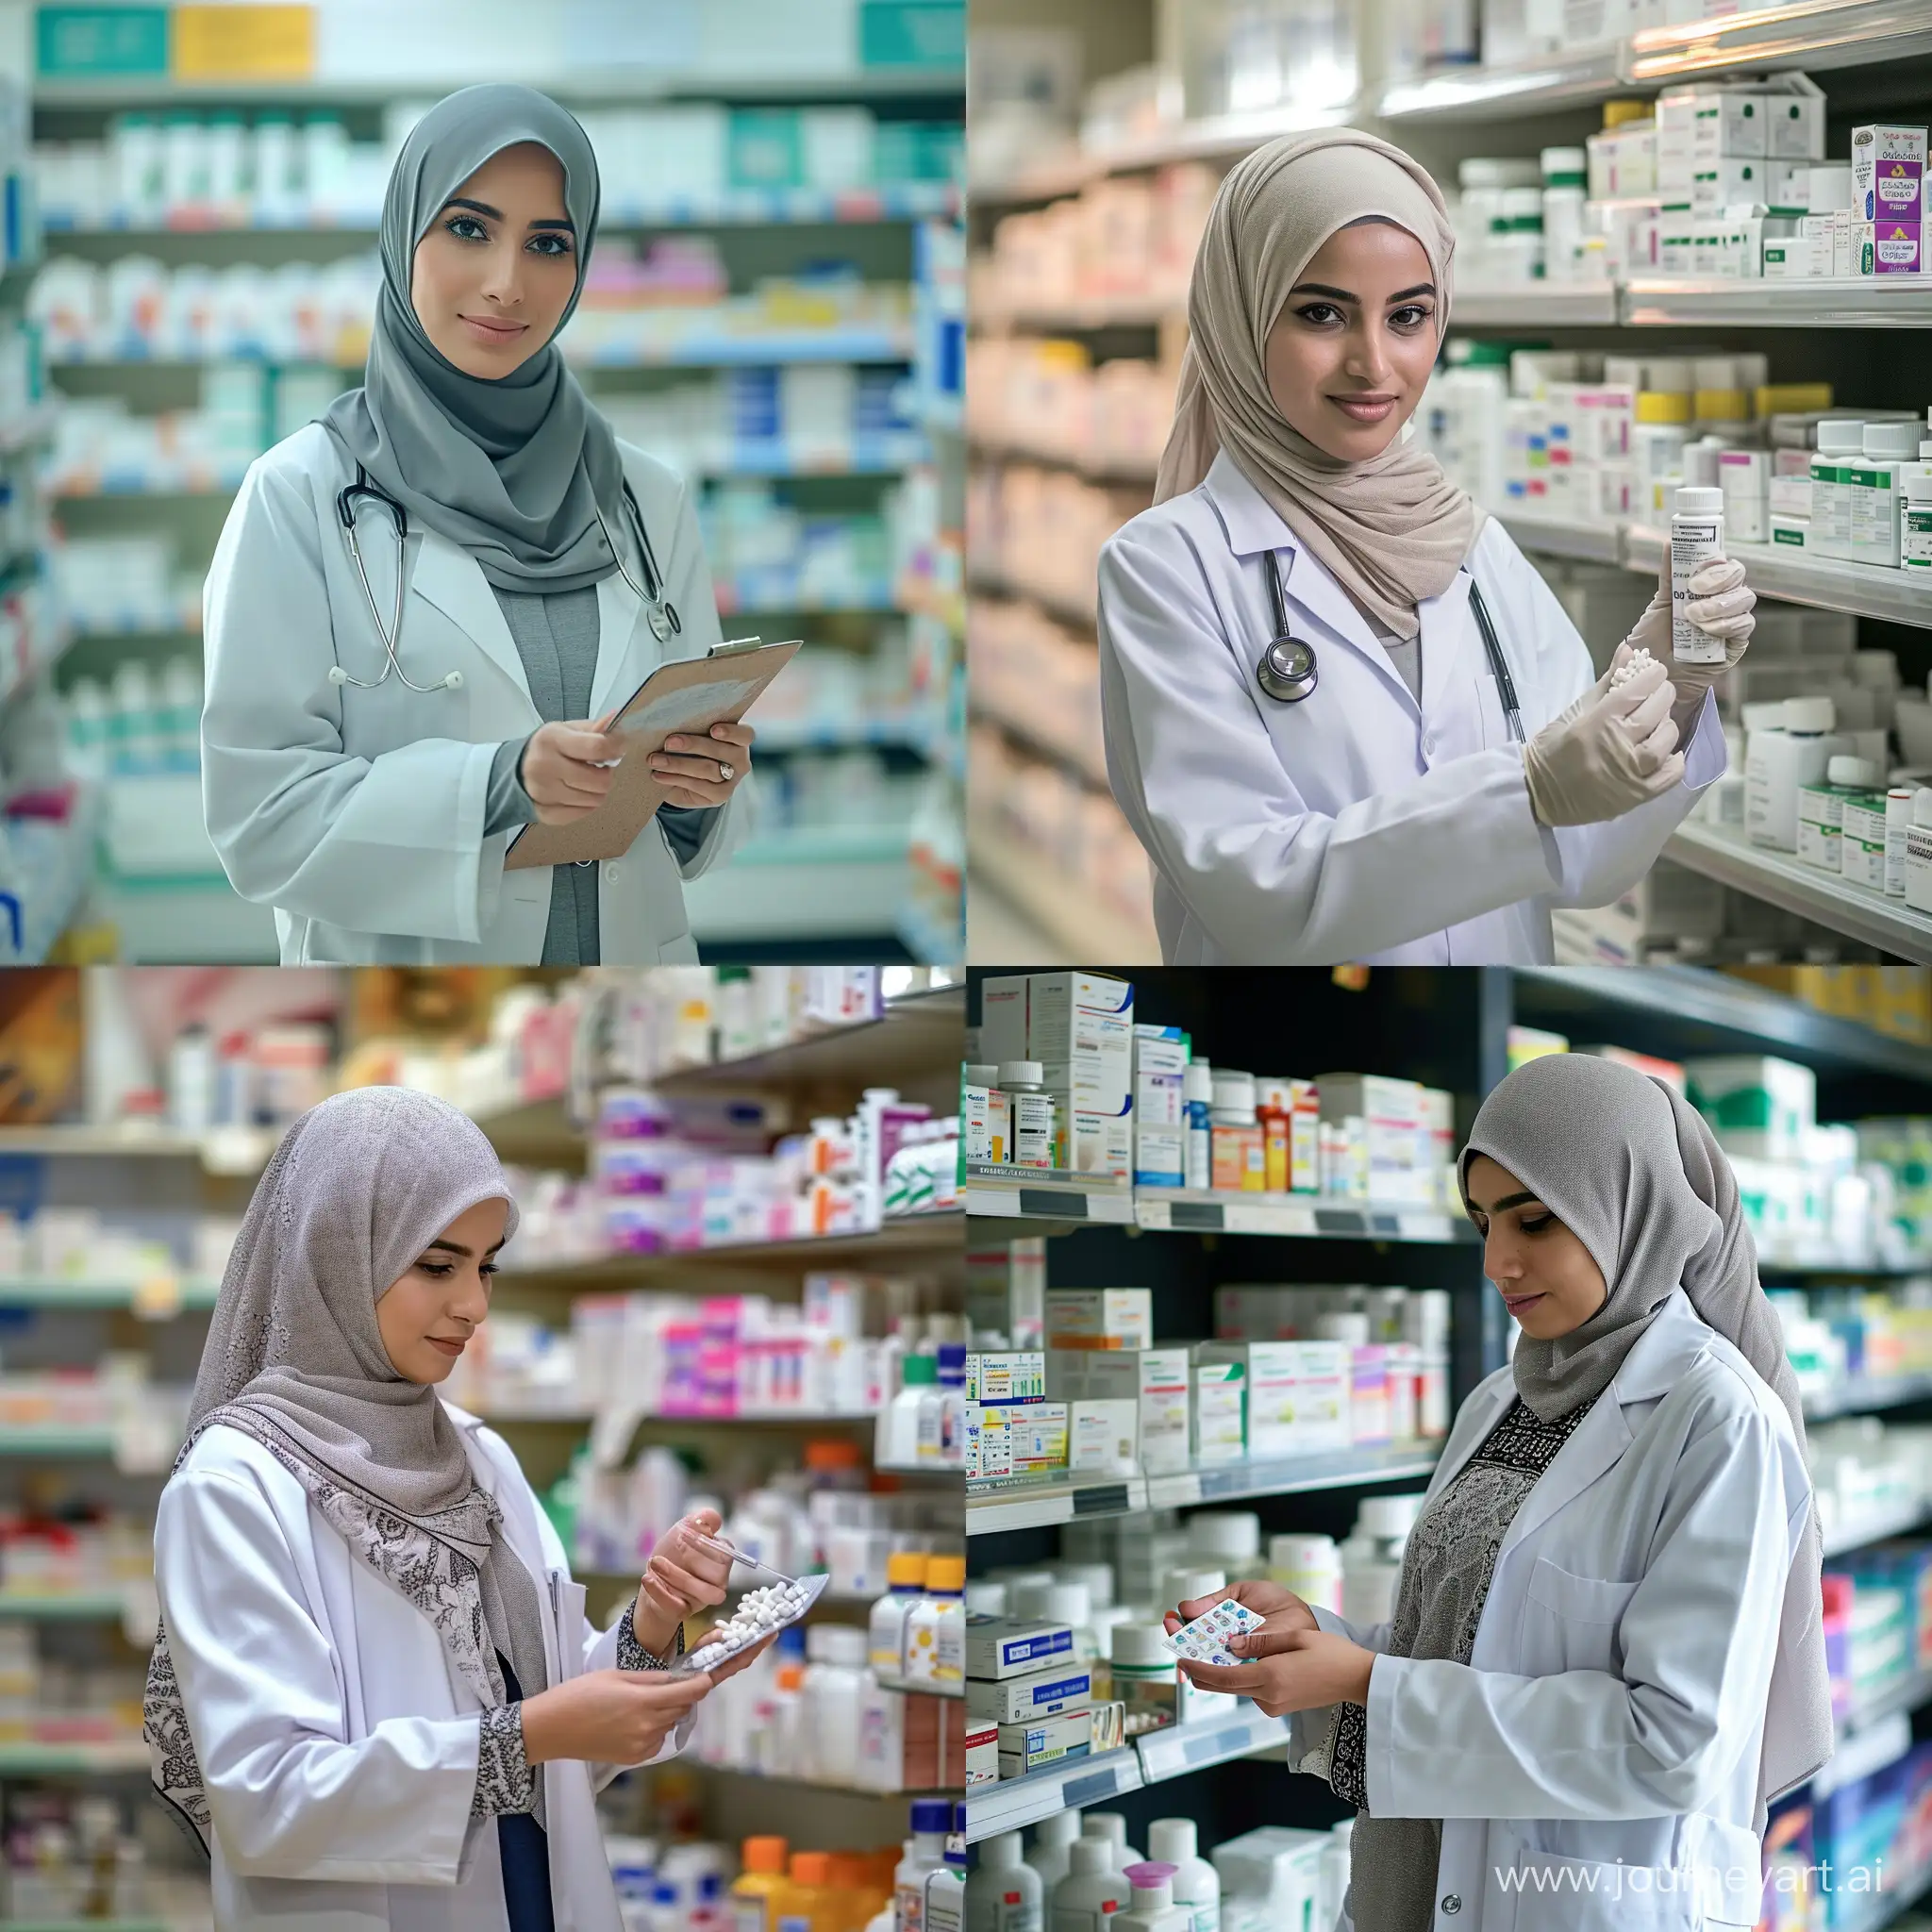 A beautiful and veiled female doctor introducing medicine in the pharmacy
From the front view
Full length
